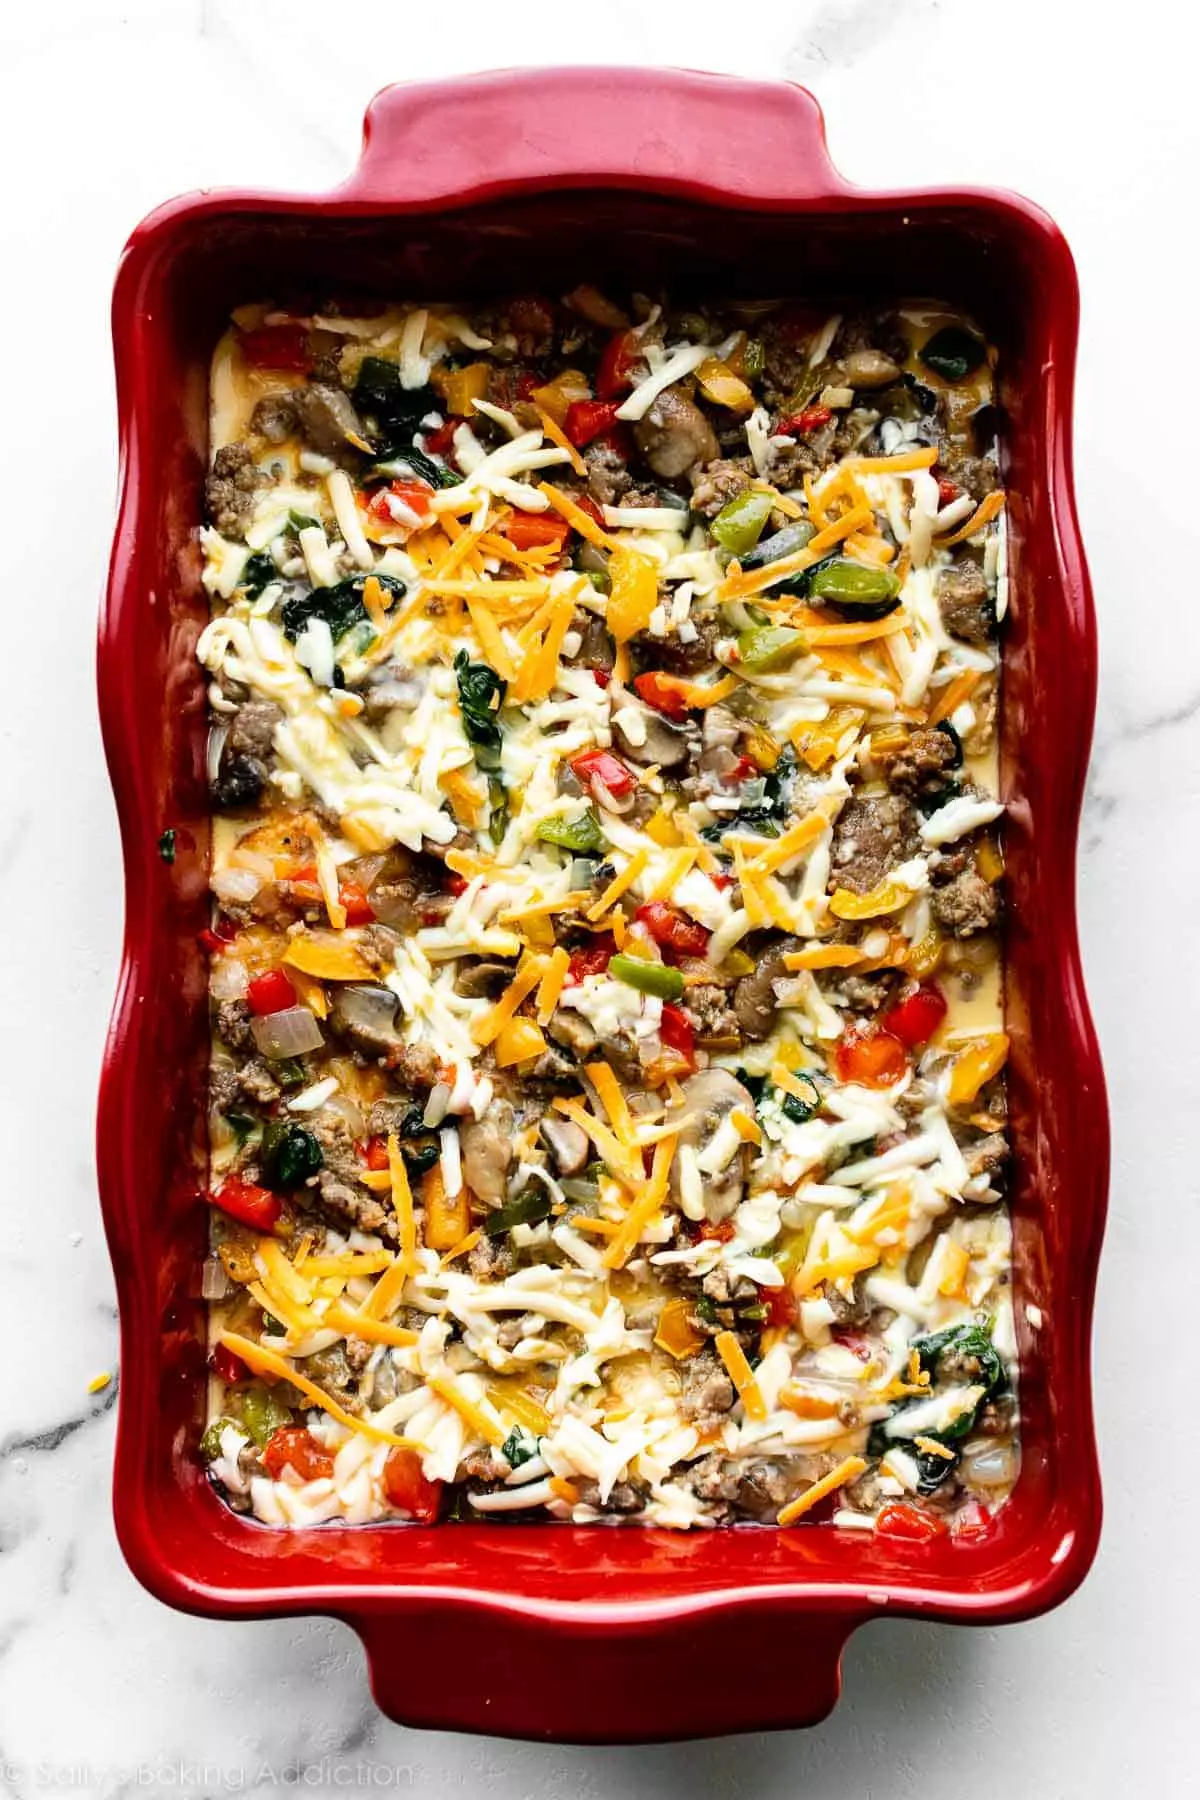 egg, vegetables, cheese, sausage, and bread combination in a casserole dish on a marble counter.